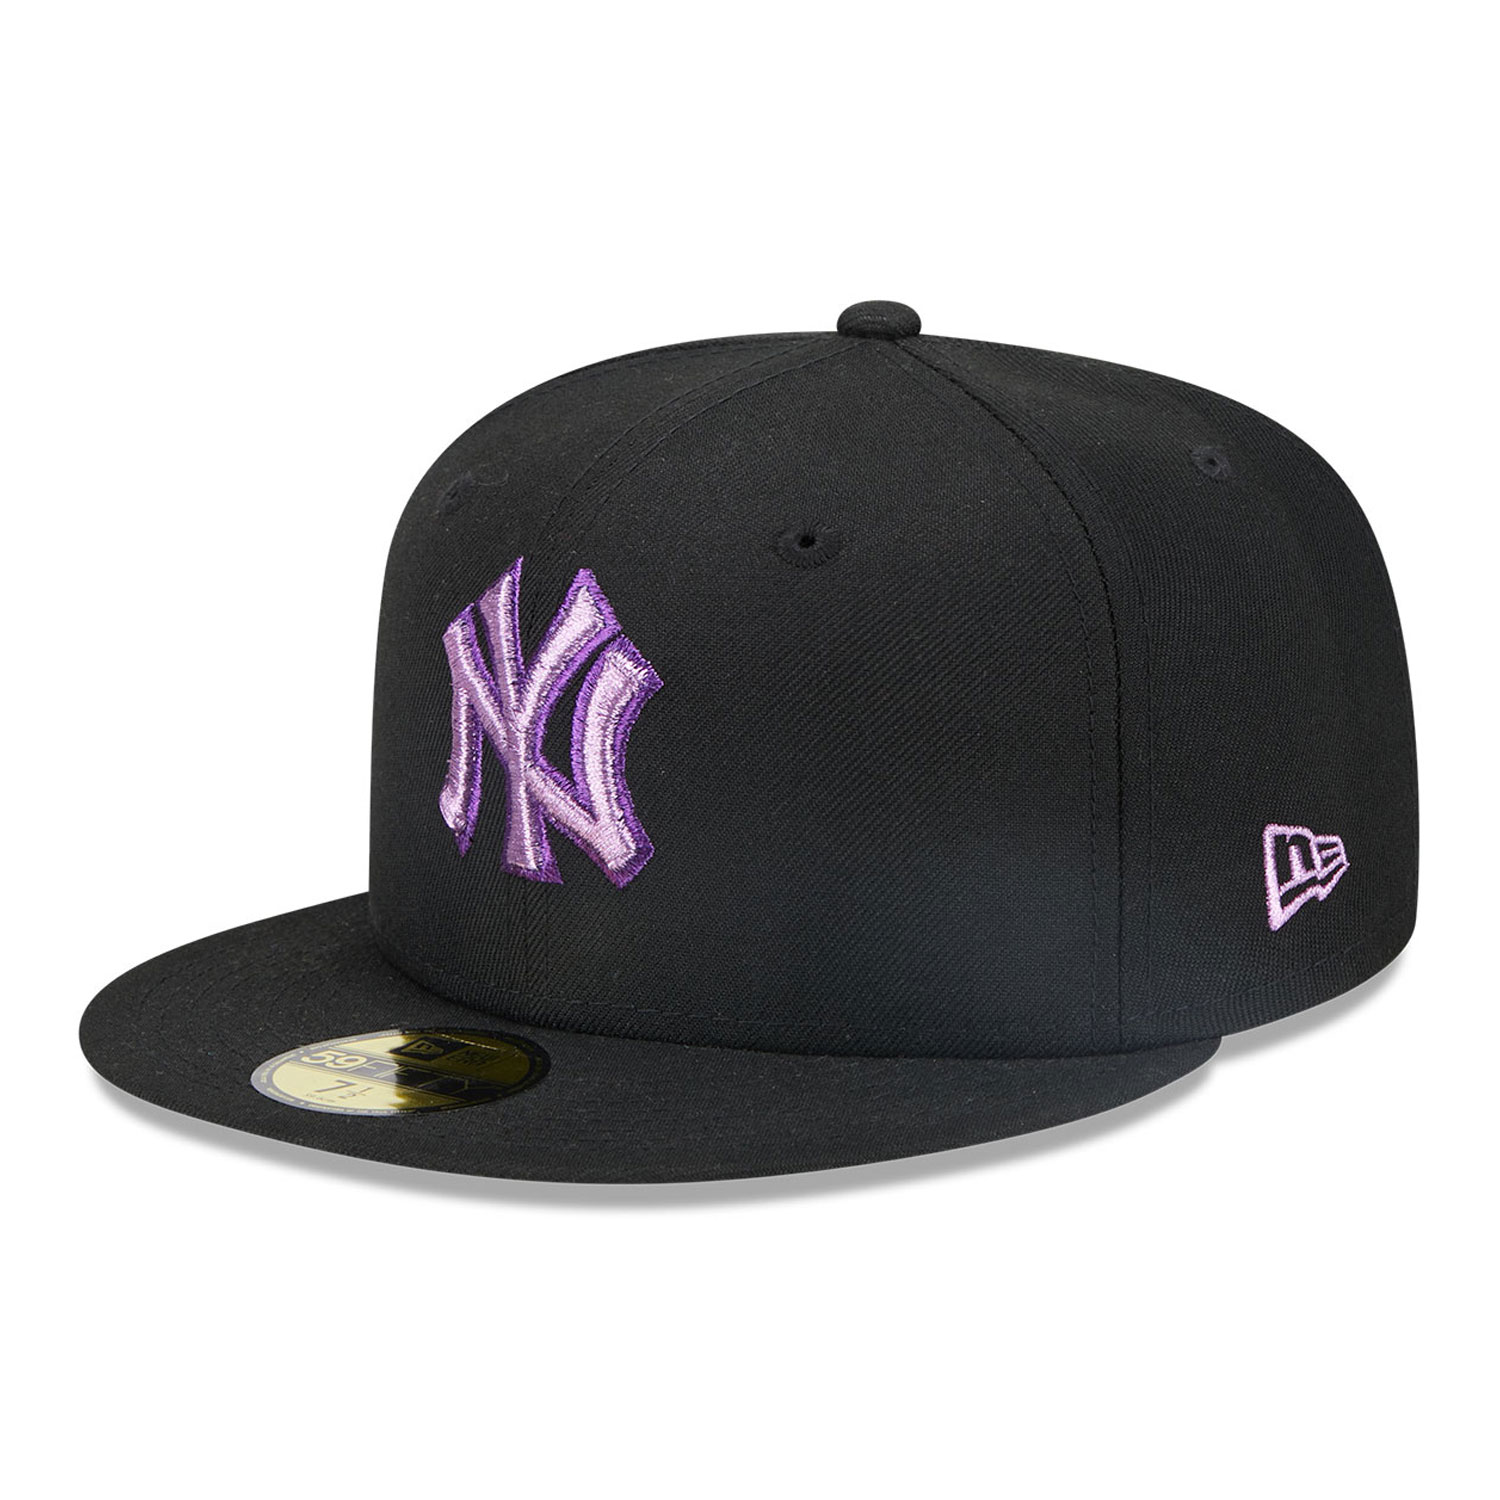 Official New Era Metallic Pop New York Yankees 59FIFTY Fitted Cap C2 ...